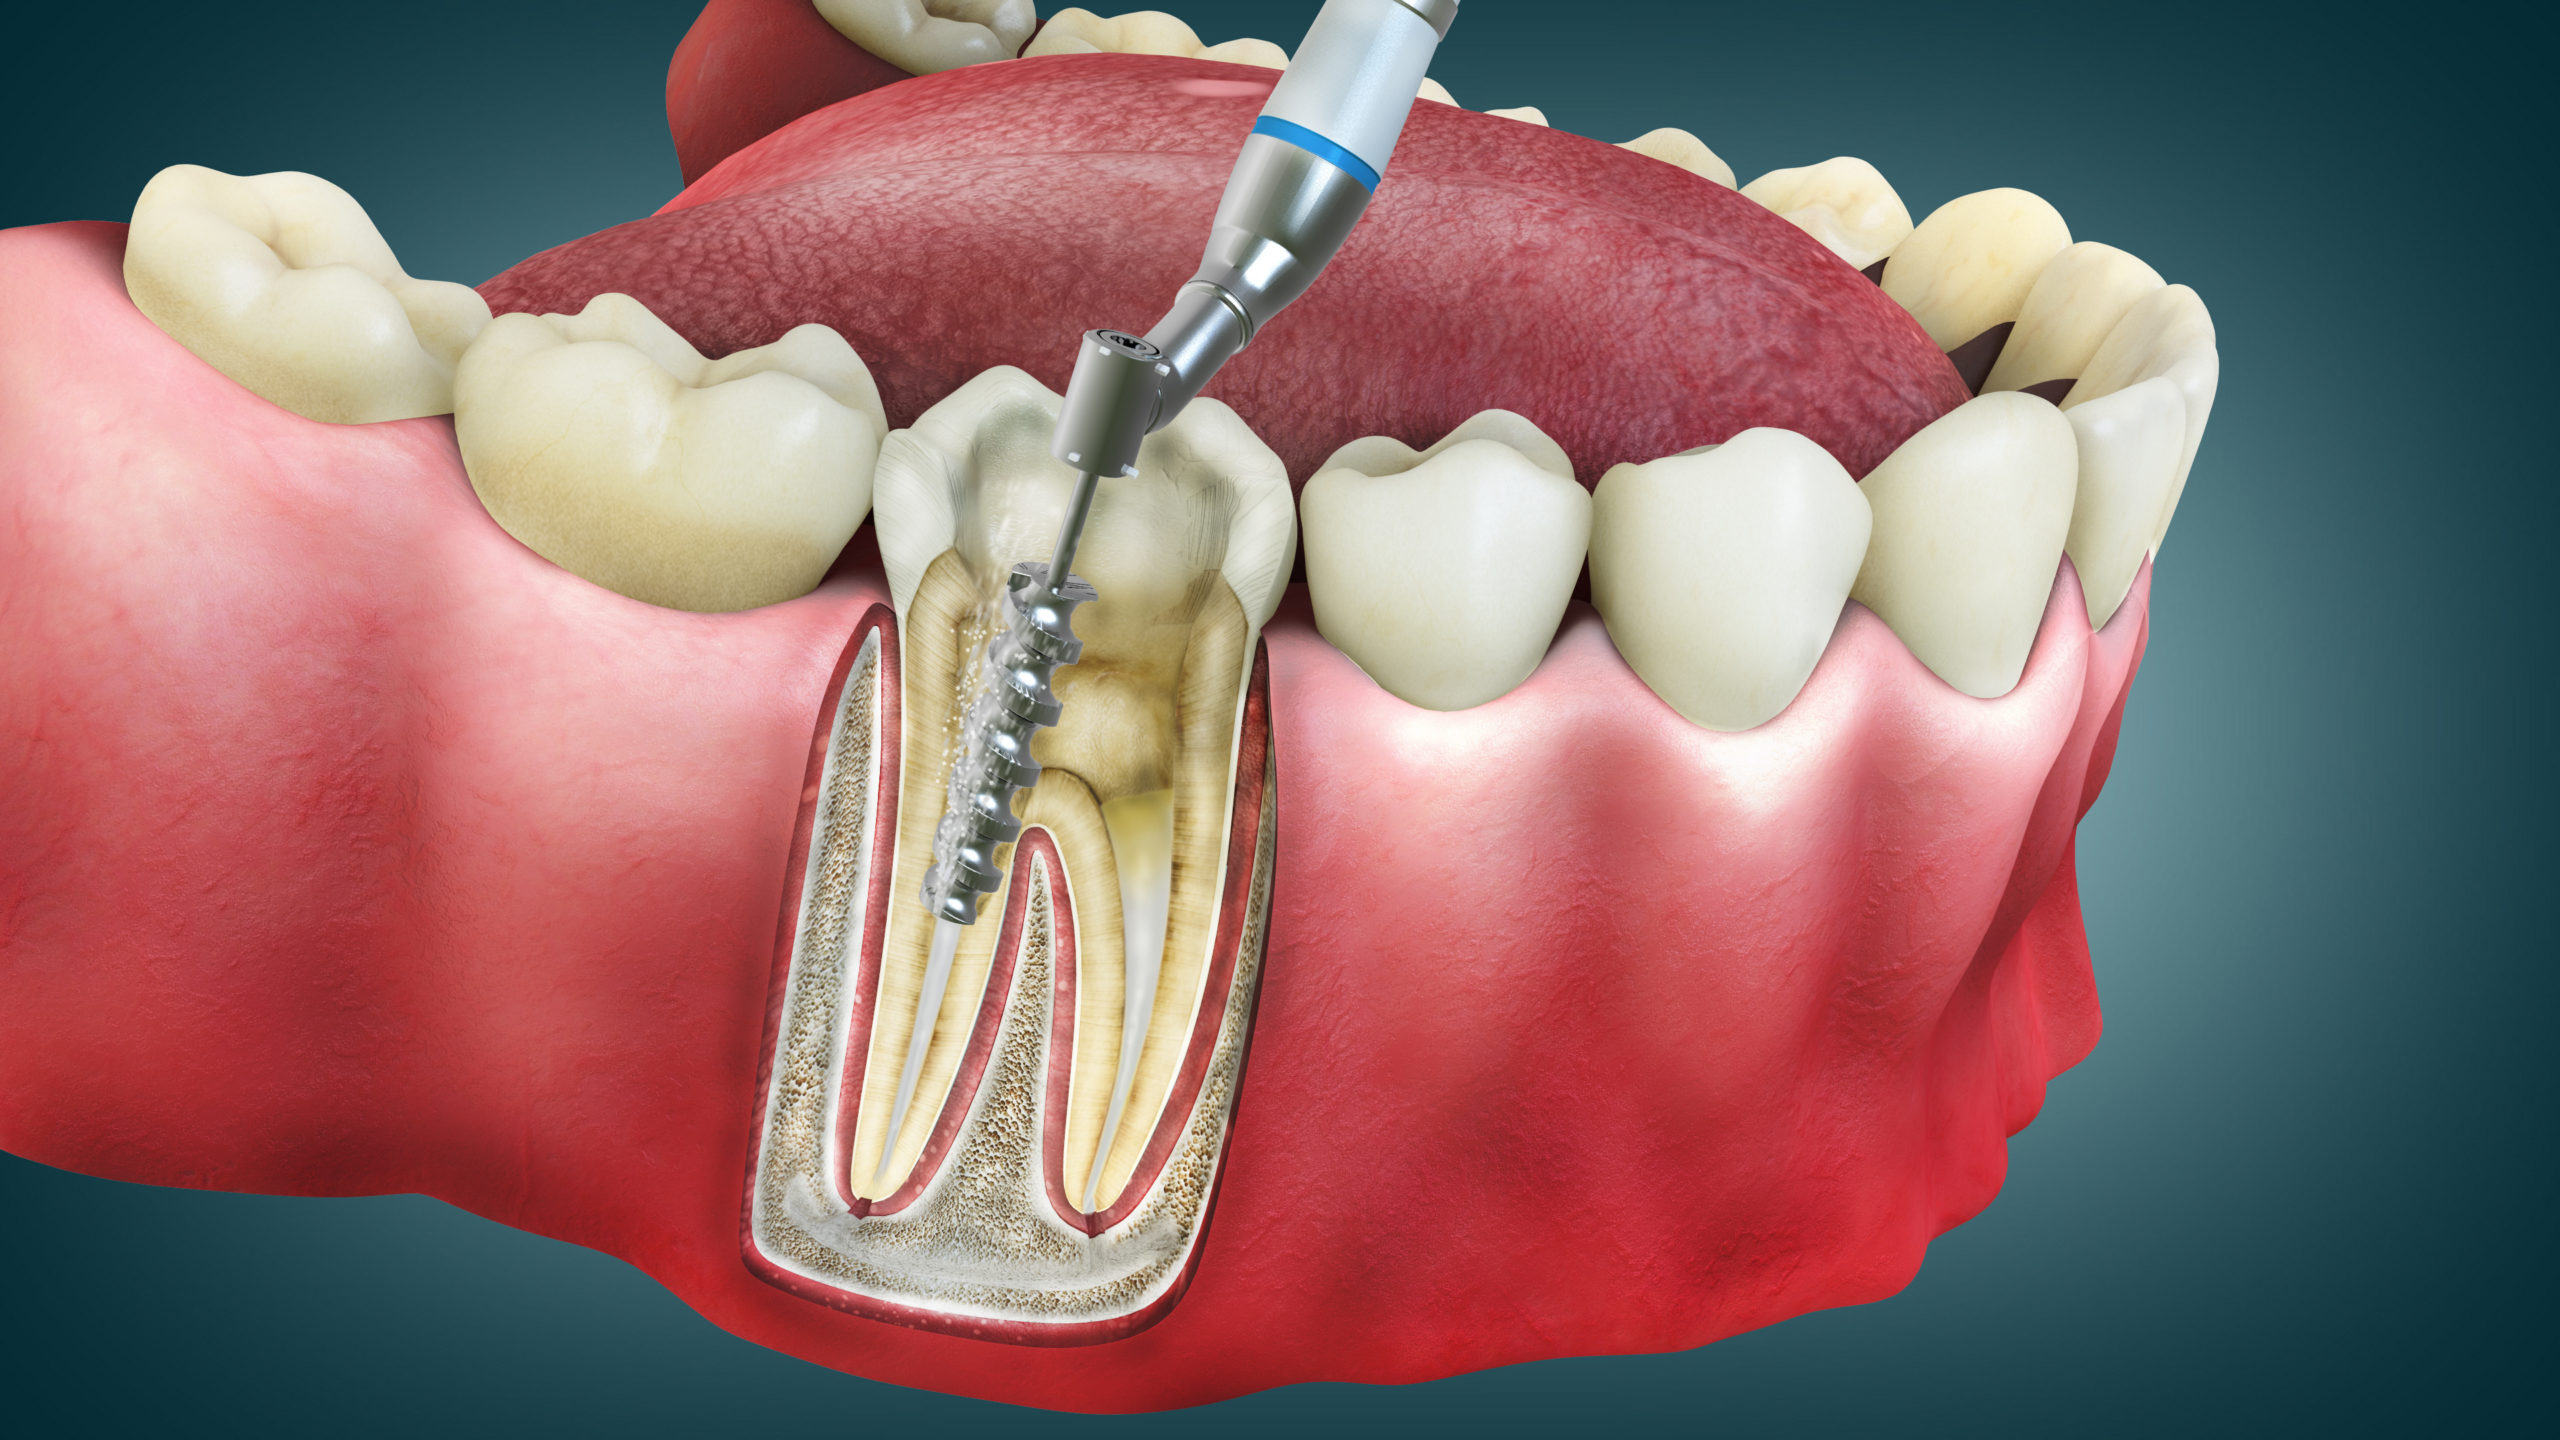 The image is of a 4D Root canal to show how to prepare for root canal procedure.